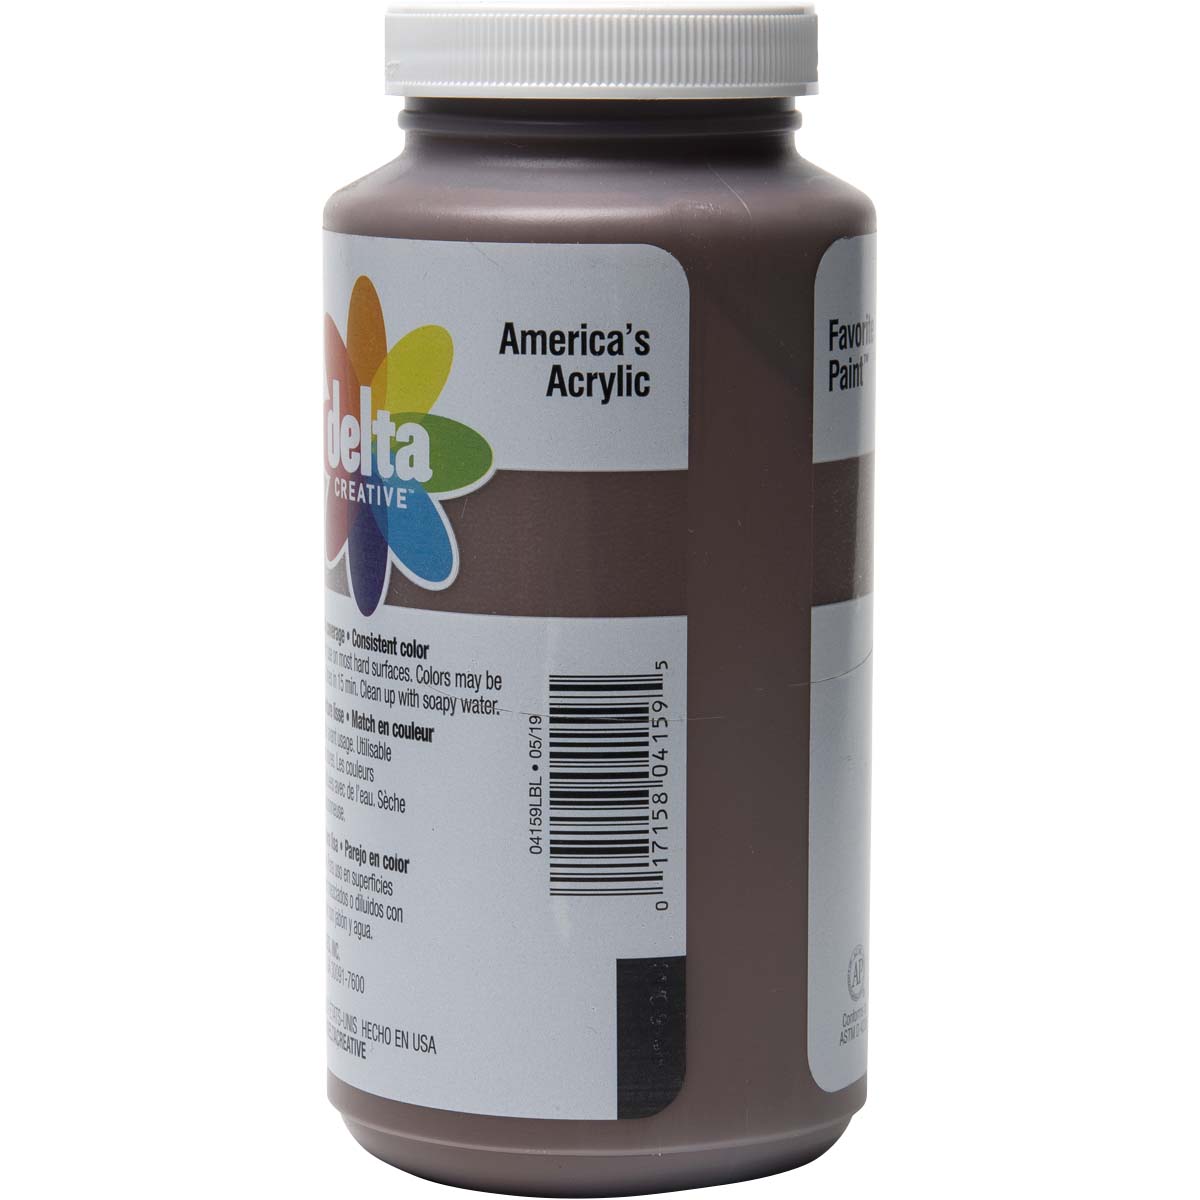 Delta Ceramcoat ® Acrylic Paint - Spice Brown, 16 oz. - 04159